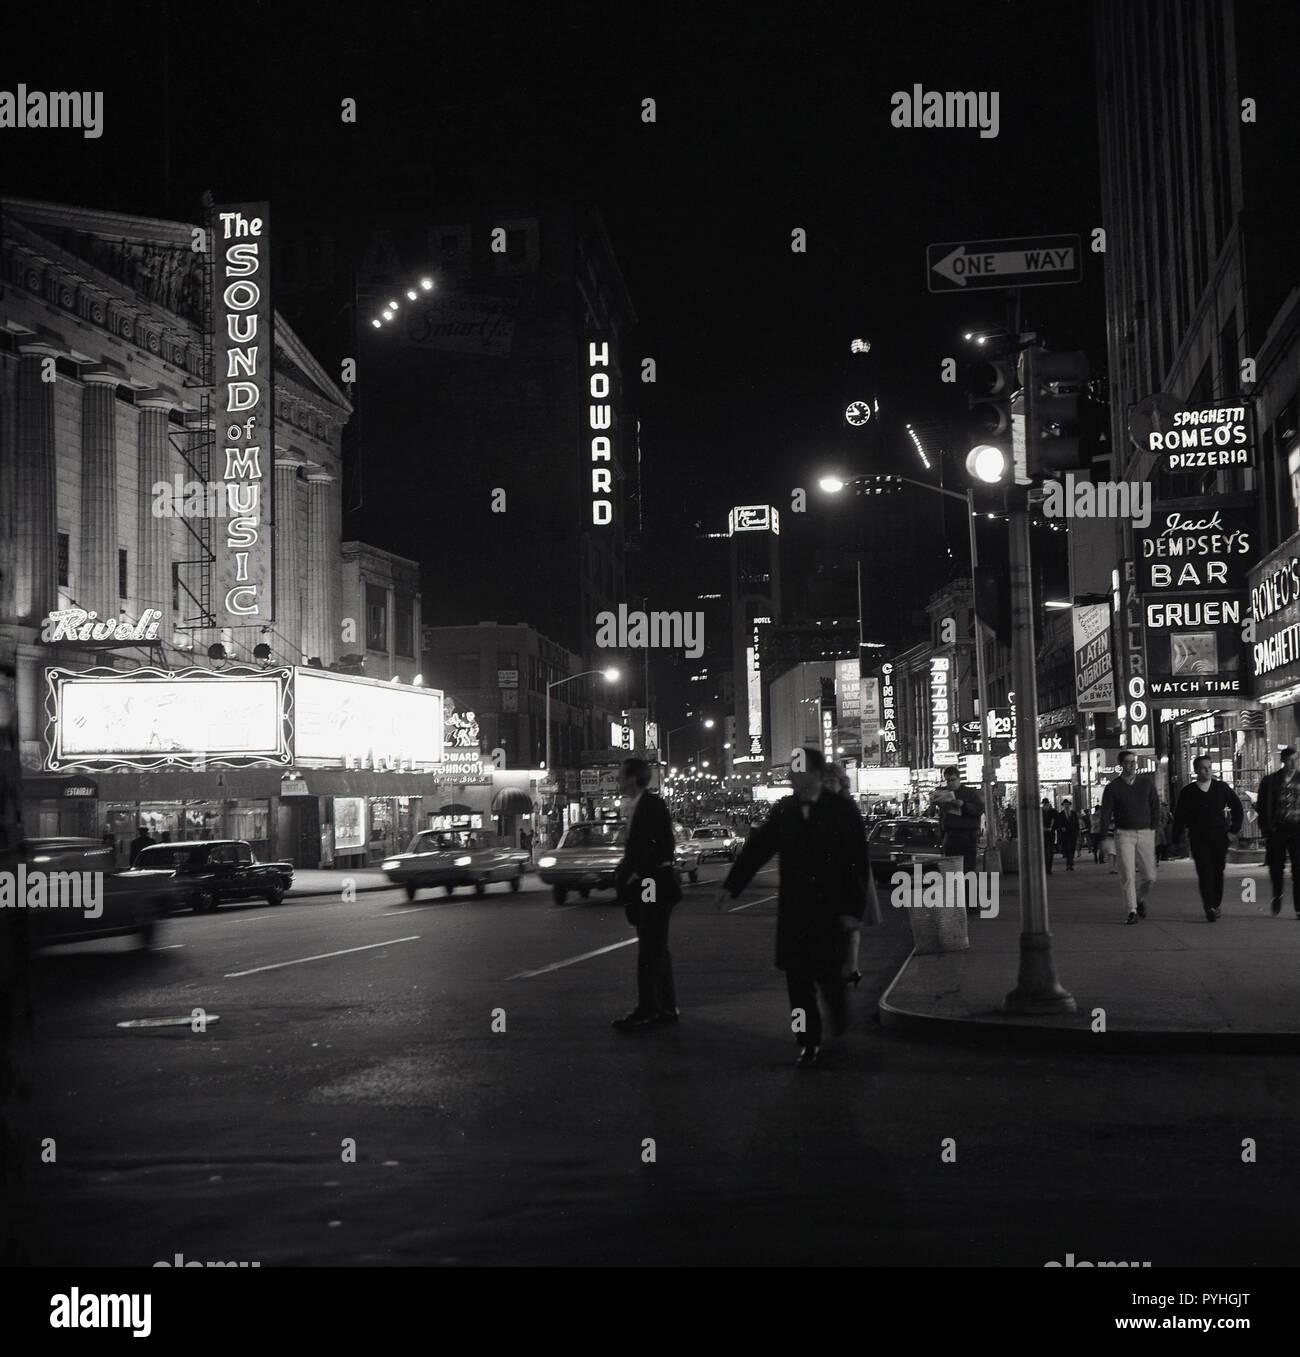 1959, historical, nightime on Broadway, midtown Manhattan and the neon lights showing the bars and restaurants and the original production of The Sound of Music, a musical by Rodgers and Hammerstein, based on the memoir of Maria von Trapp, staring Mary Martin and Theodore Bikel. On the right is Jack Dempsey's, the bar and restaurant owned by the former world Heavyweight boxing champion and a cultural icon of the 1920s. Stock Photo